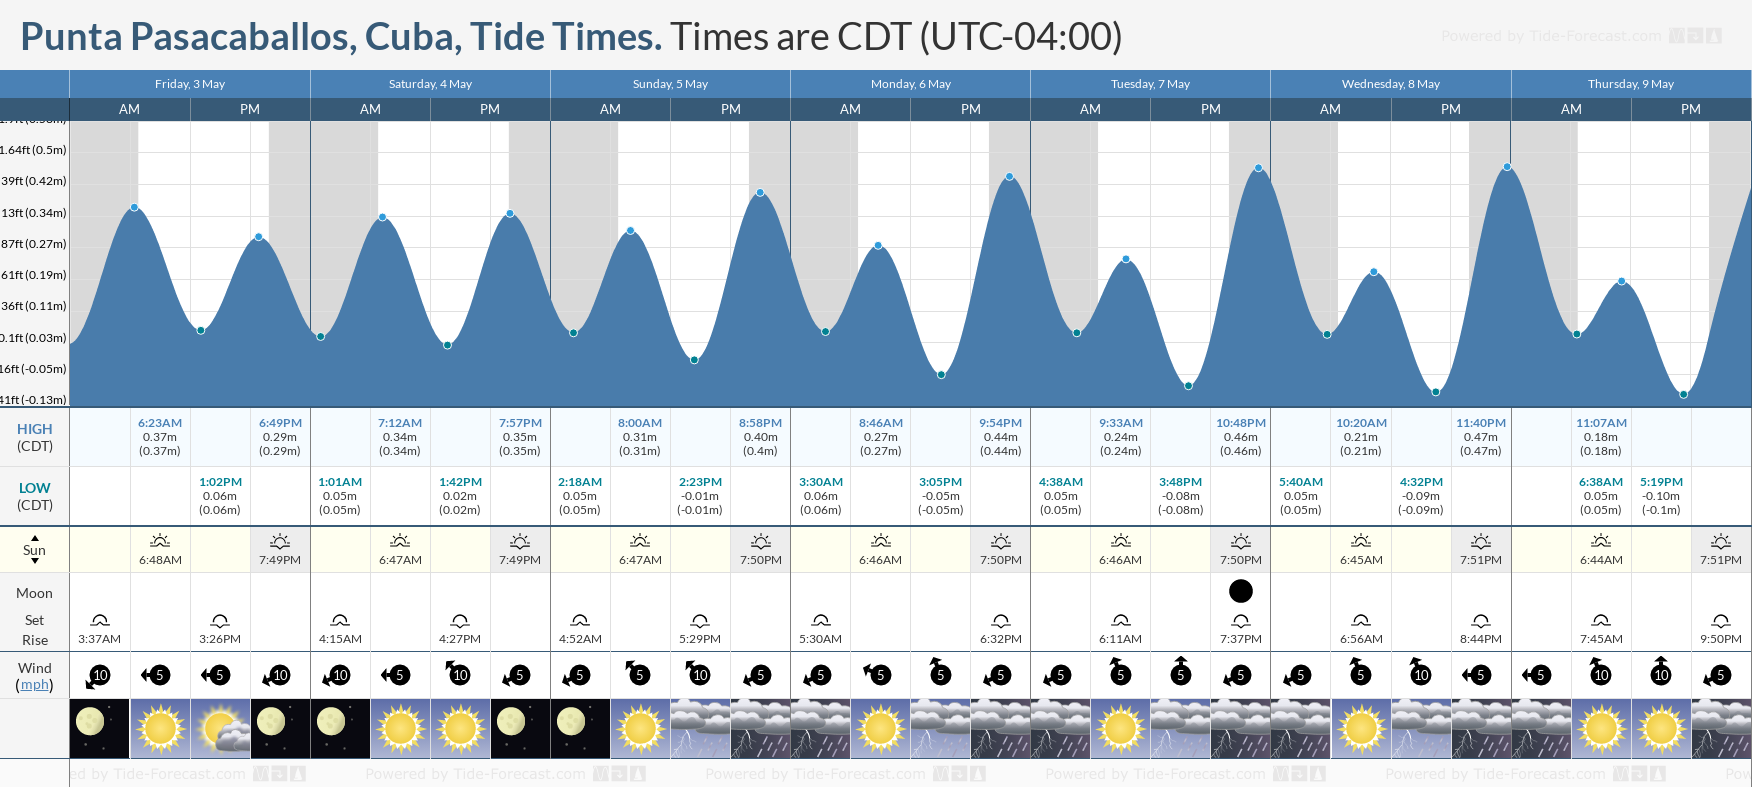 Punta Pasacaballos, Cuba Tide Chart including high and low tide tide times for the next 7 days